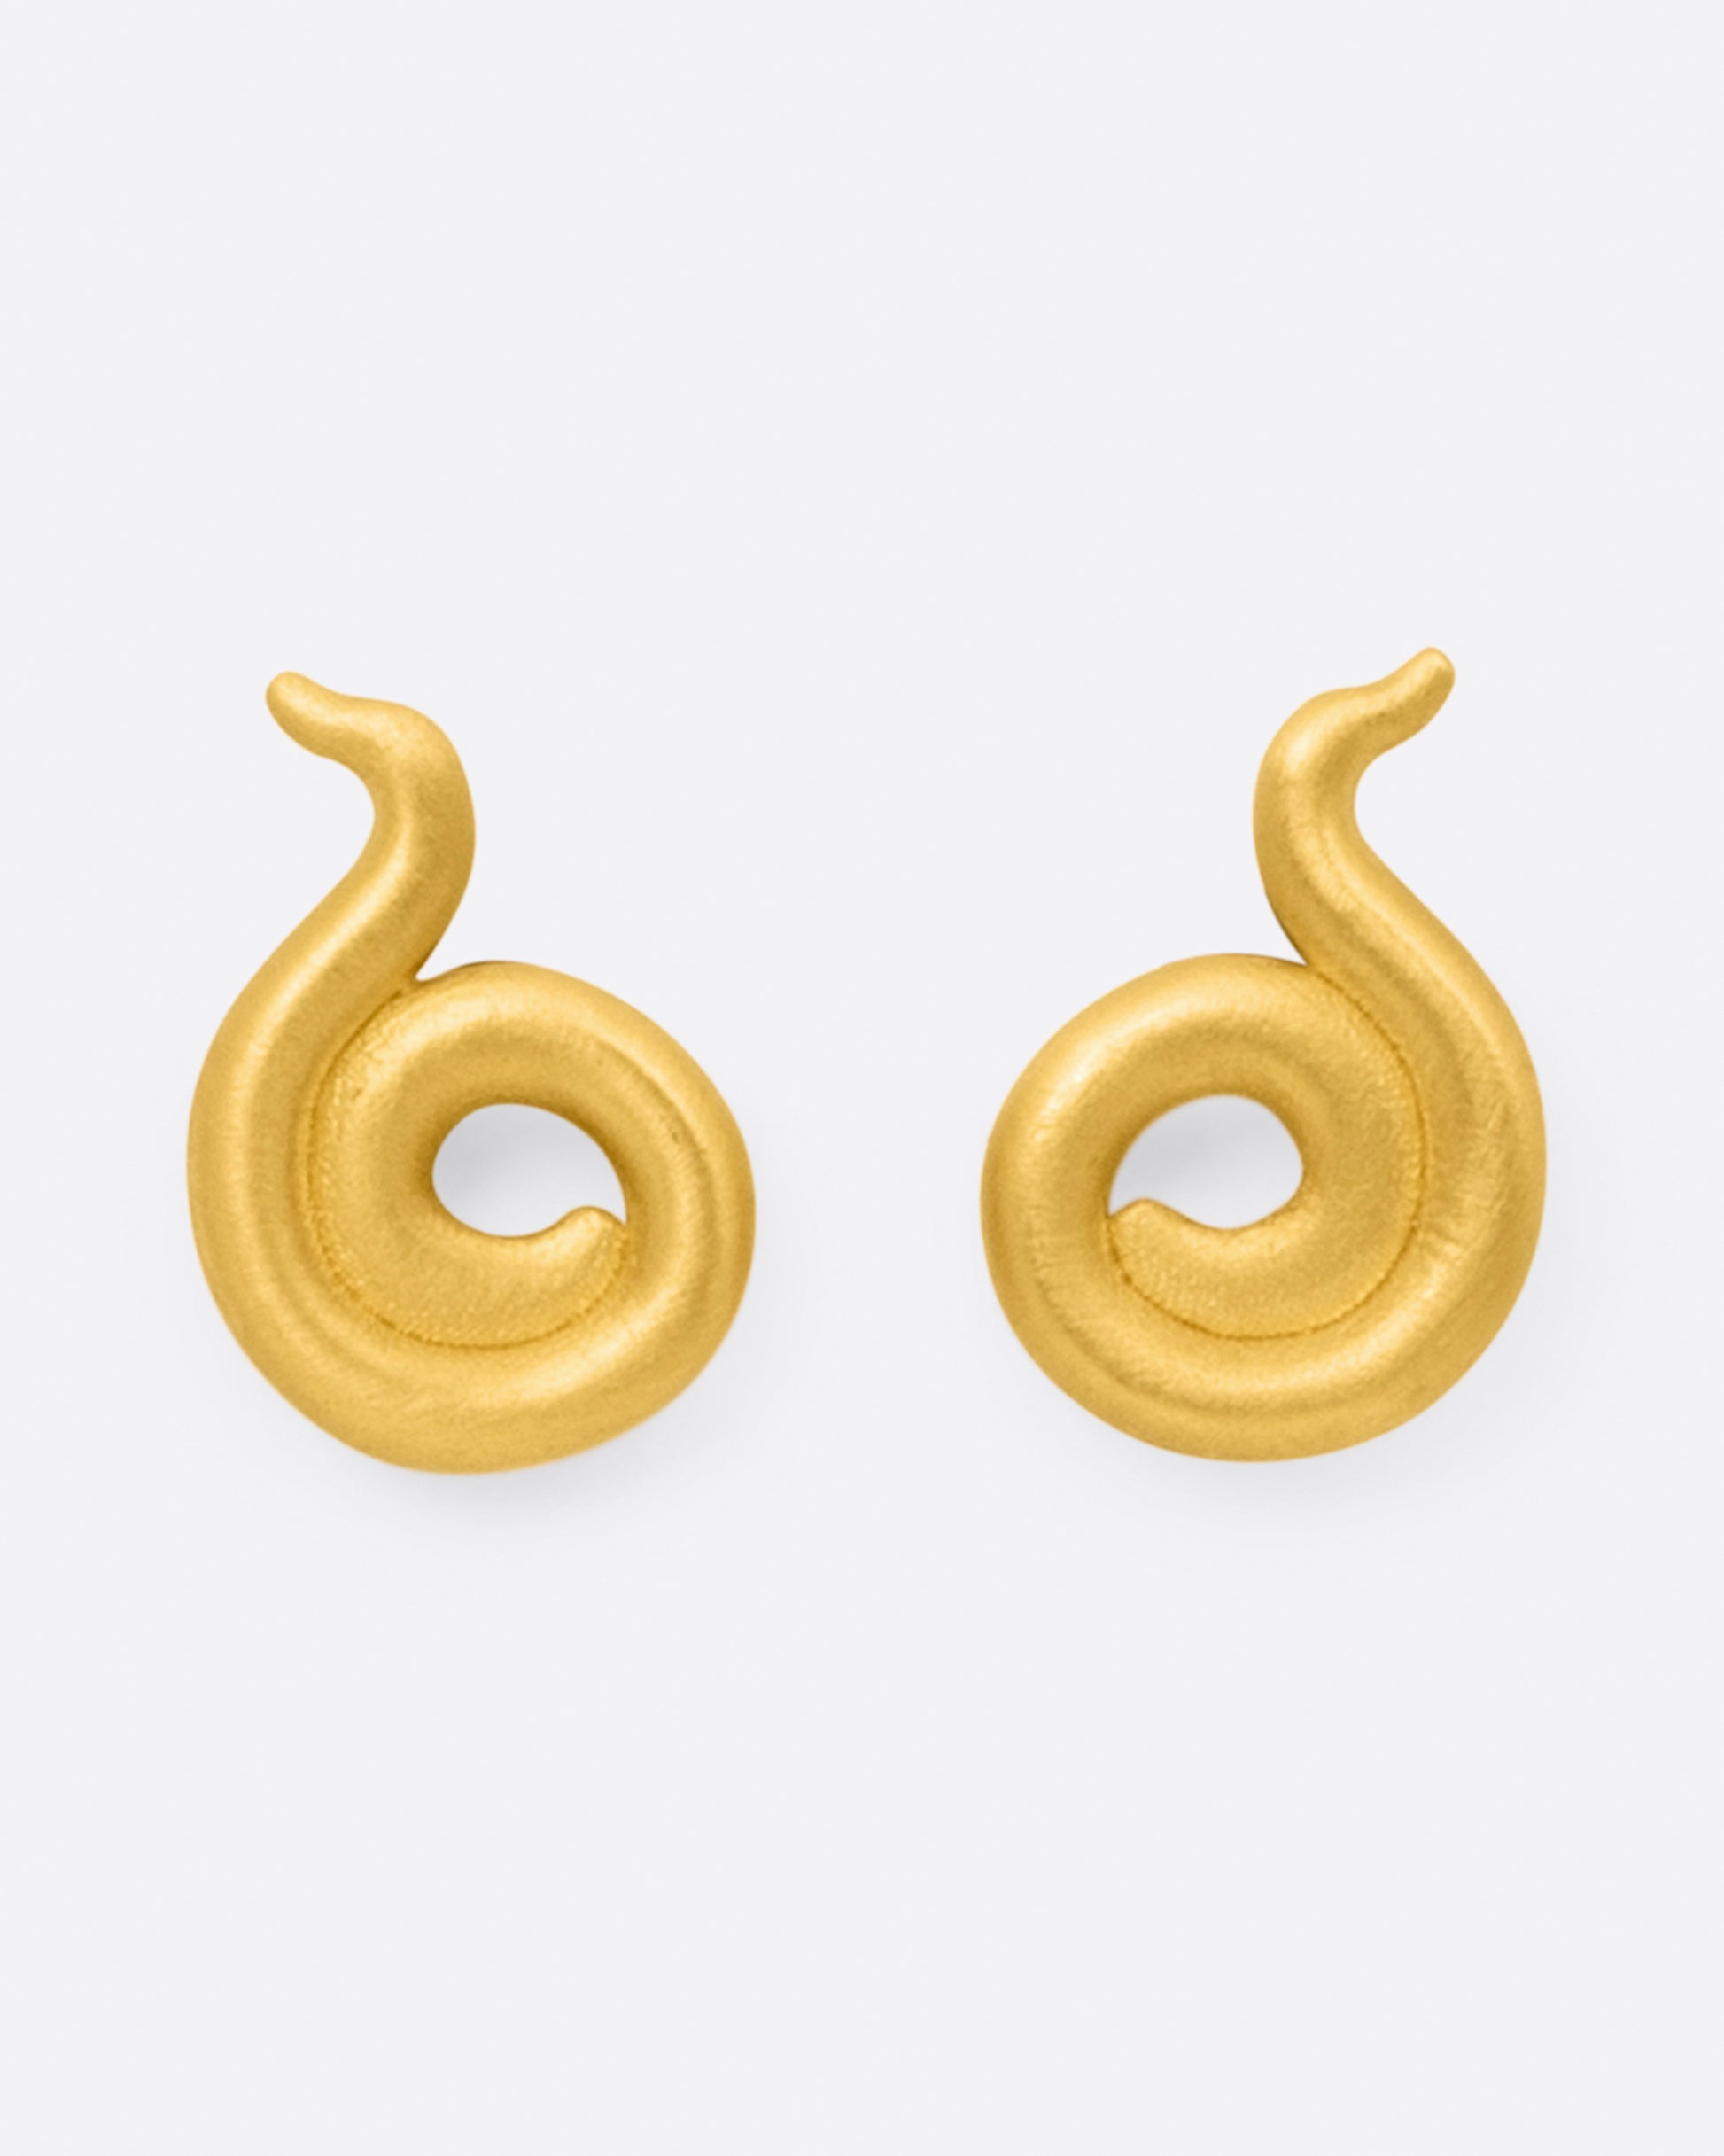 A pair of coiled 22k yellow gold stud earrings, shown from the front.